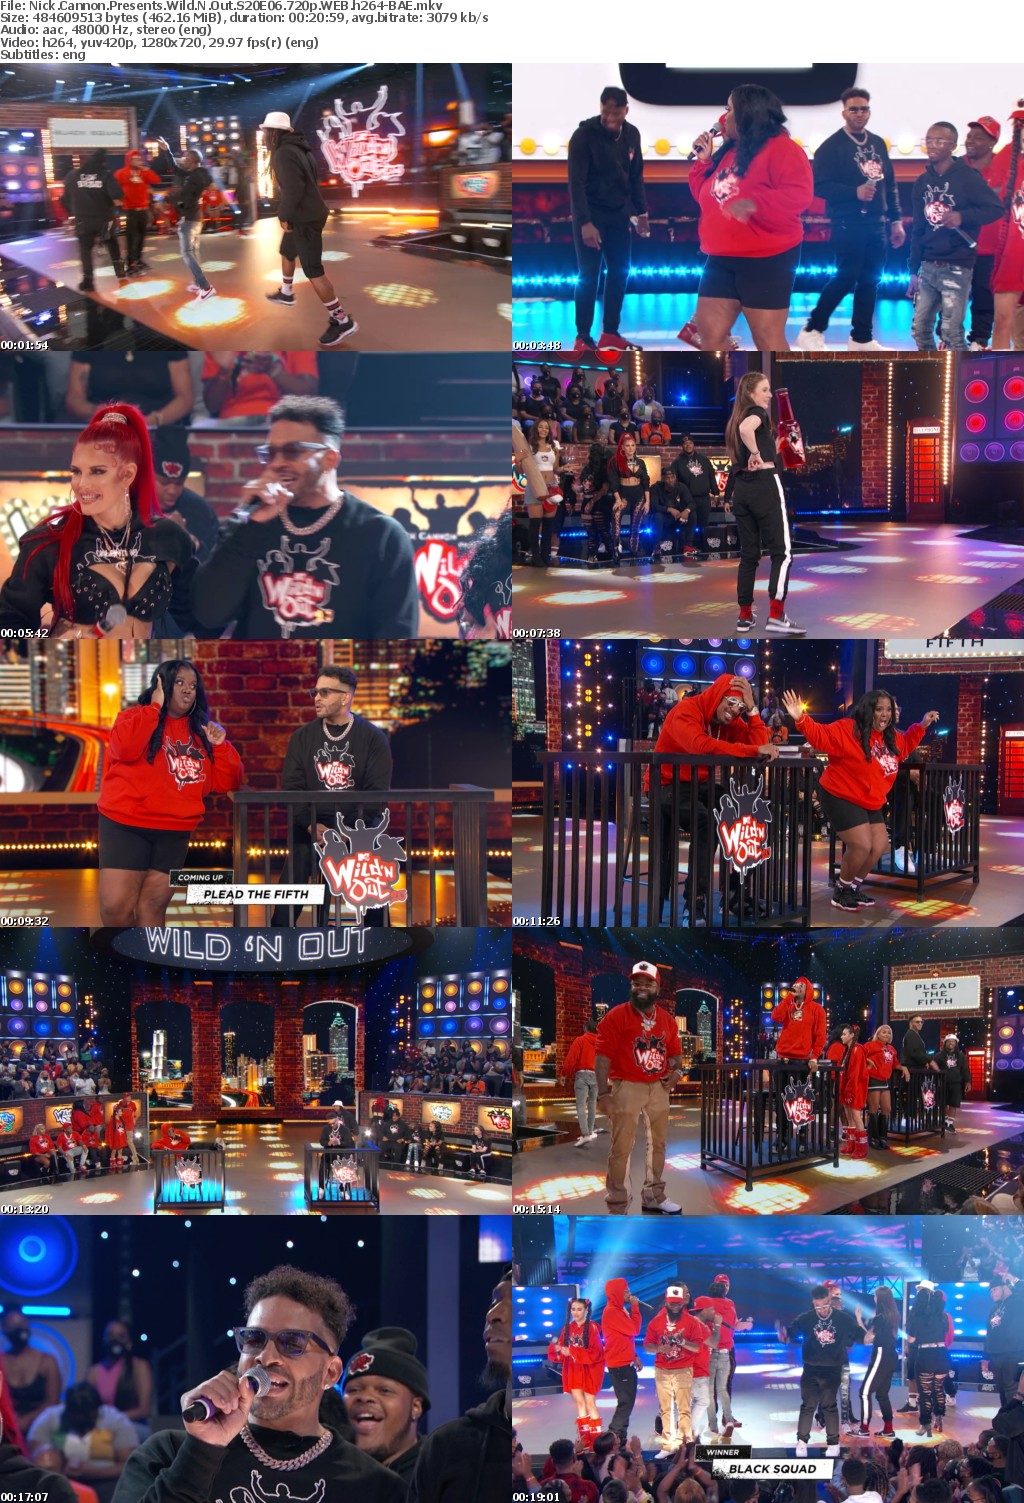 Nick Cannon Presents Wild N Out S20E06 720p WEB h264-BAE